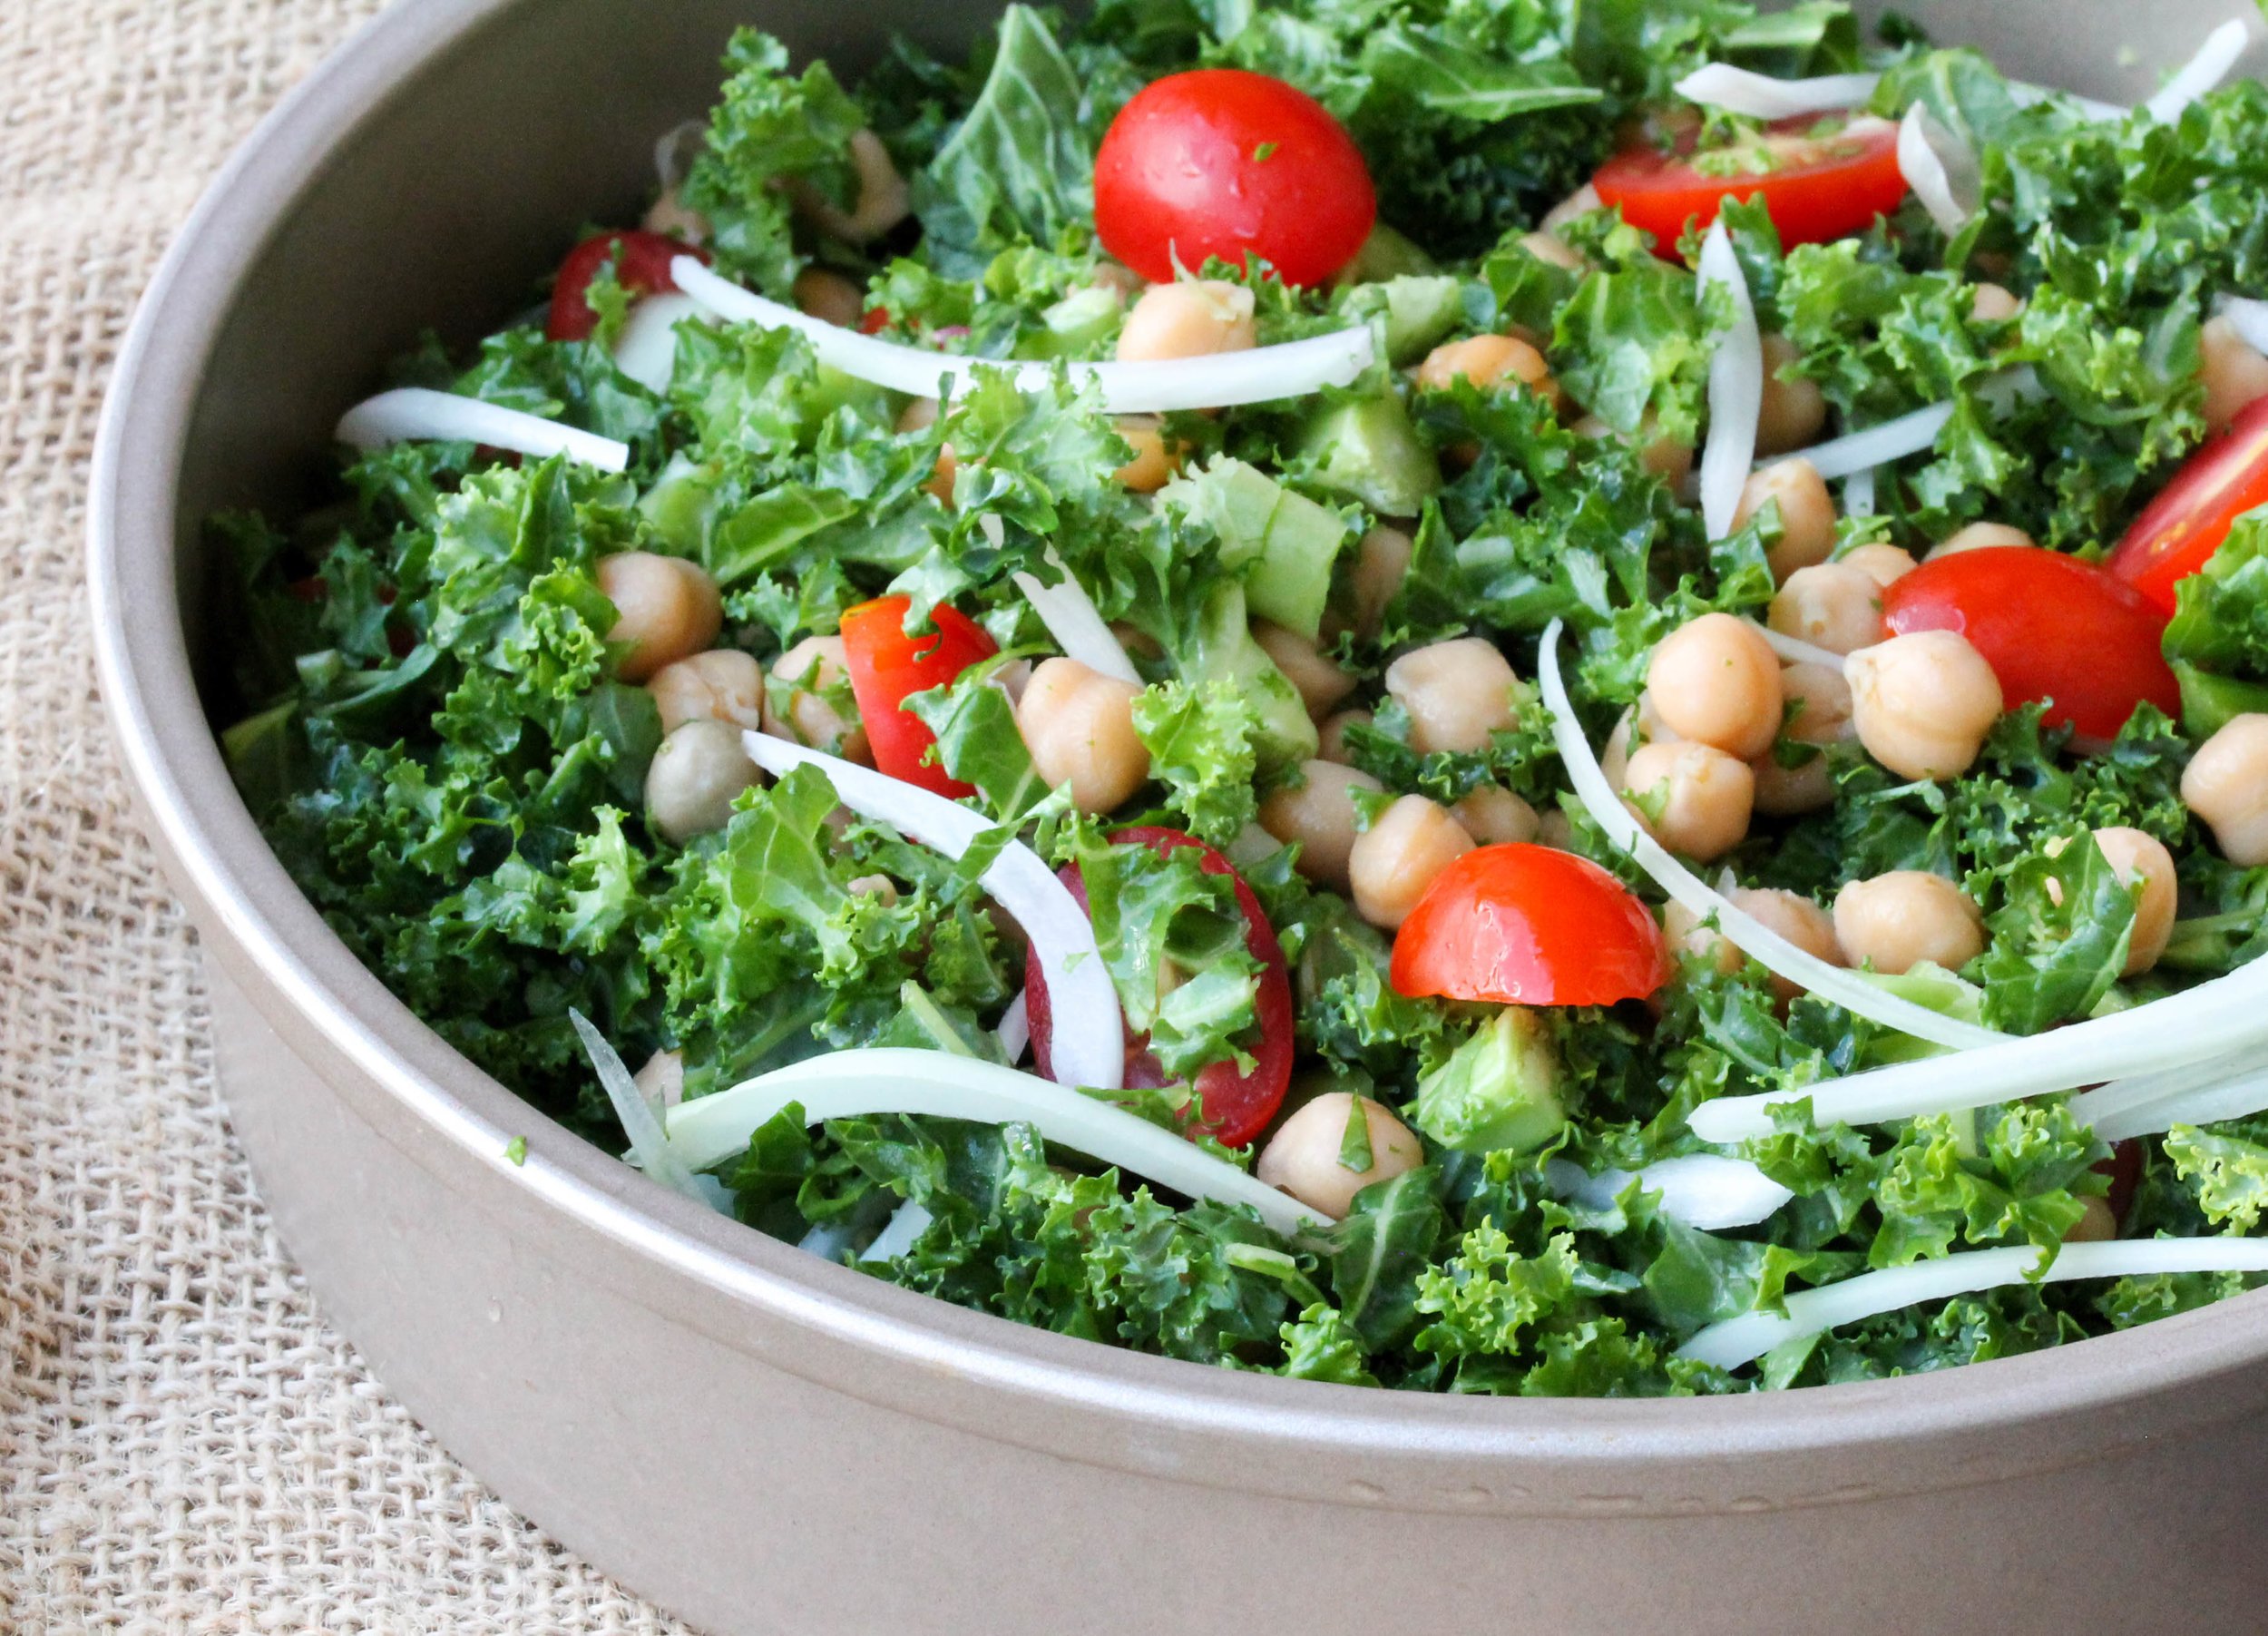 Chopped Kale and Chickpea Salad with Tamarind Vinaigrette is a sturdy, nutritious salad that packs well for lunch/picnic! It is naturally vegan, gluten-free, and allergy friendly as well.